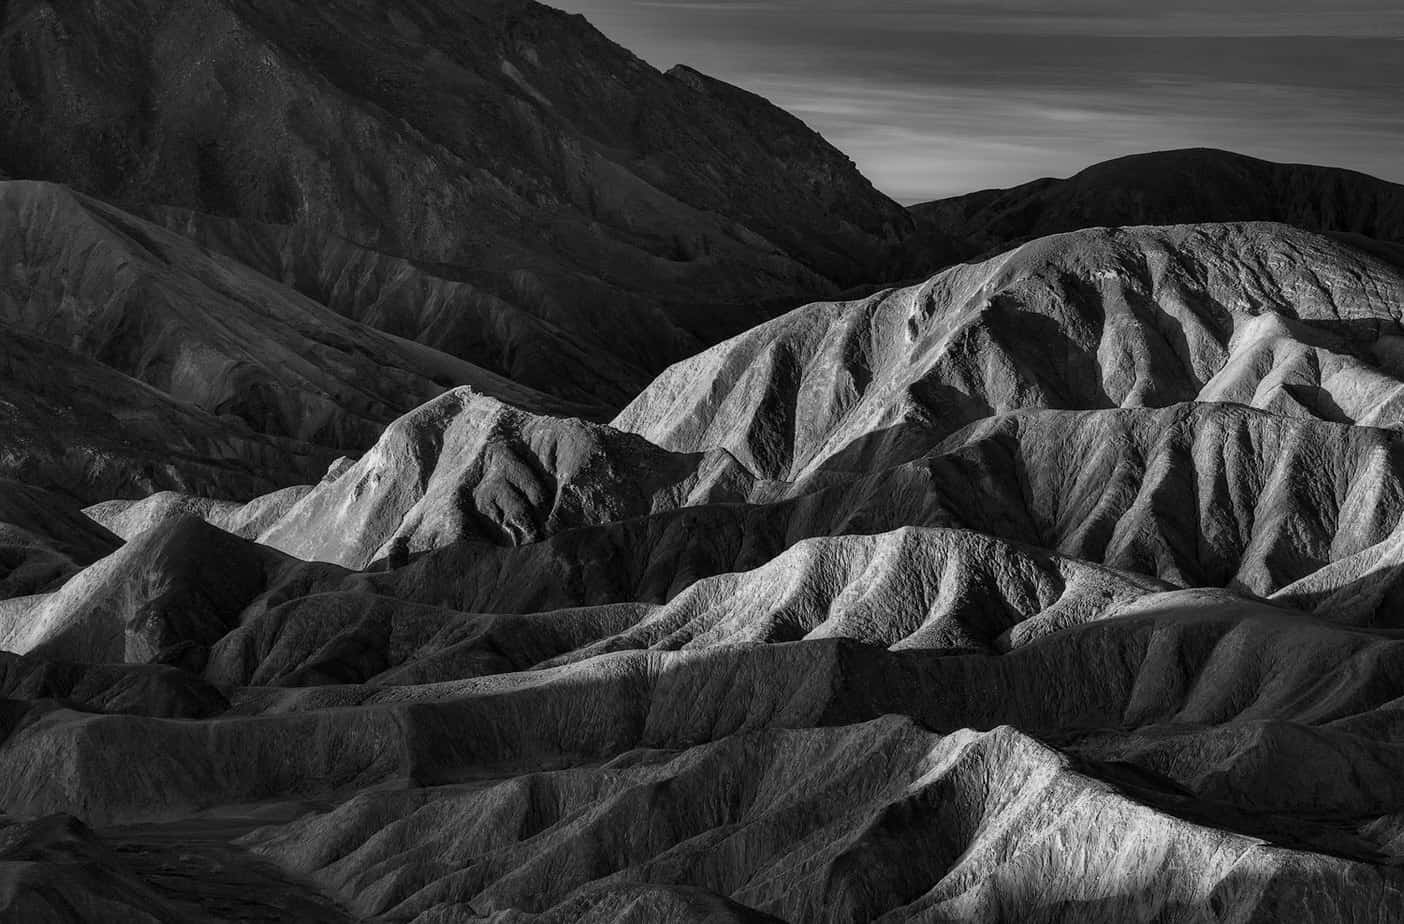 Early Light Illuminates a Small Section 
of Death Valley’s Badlands (Death Valley National Park, California)